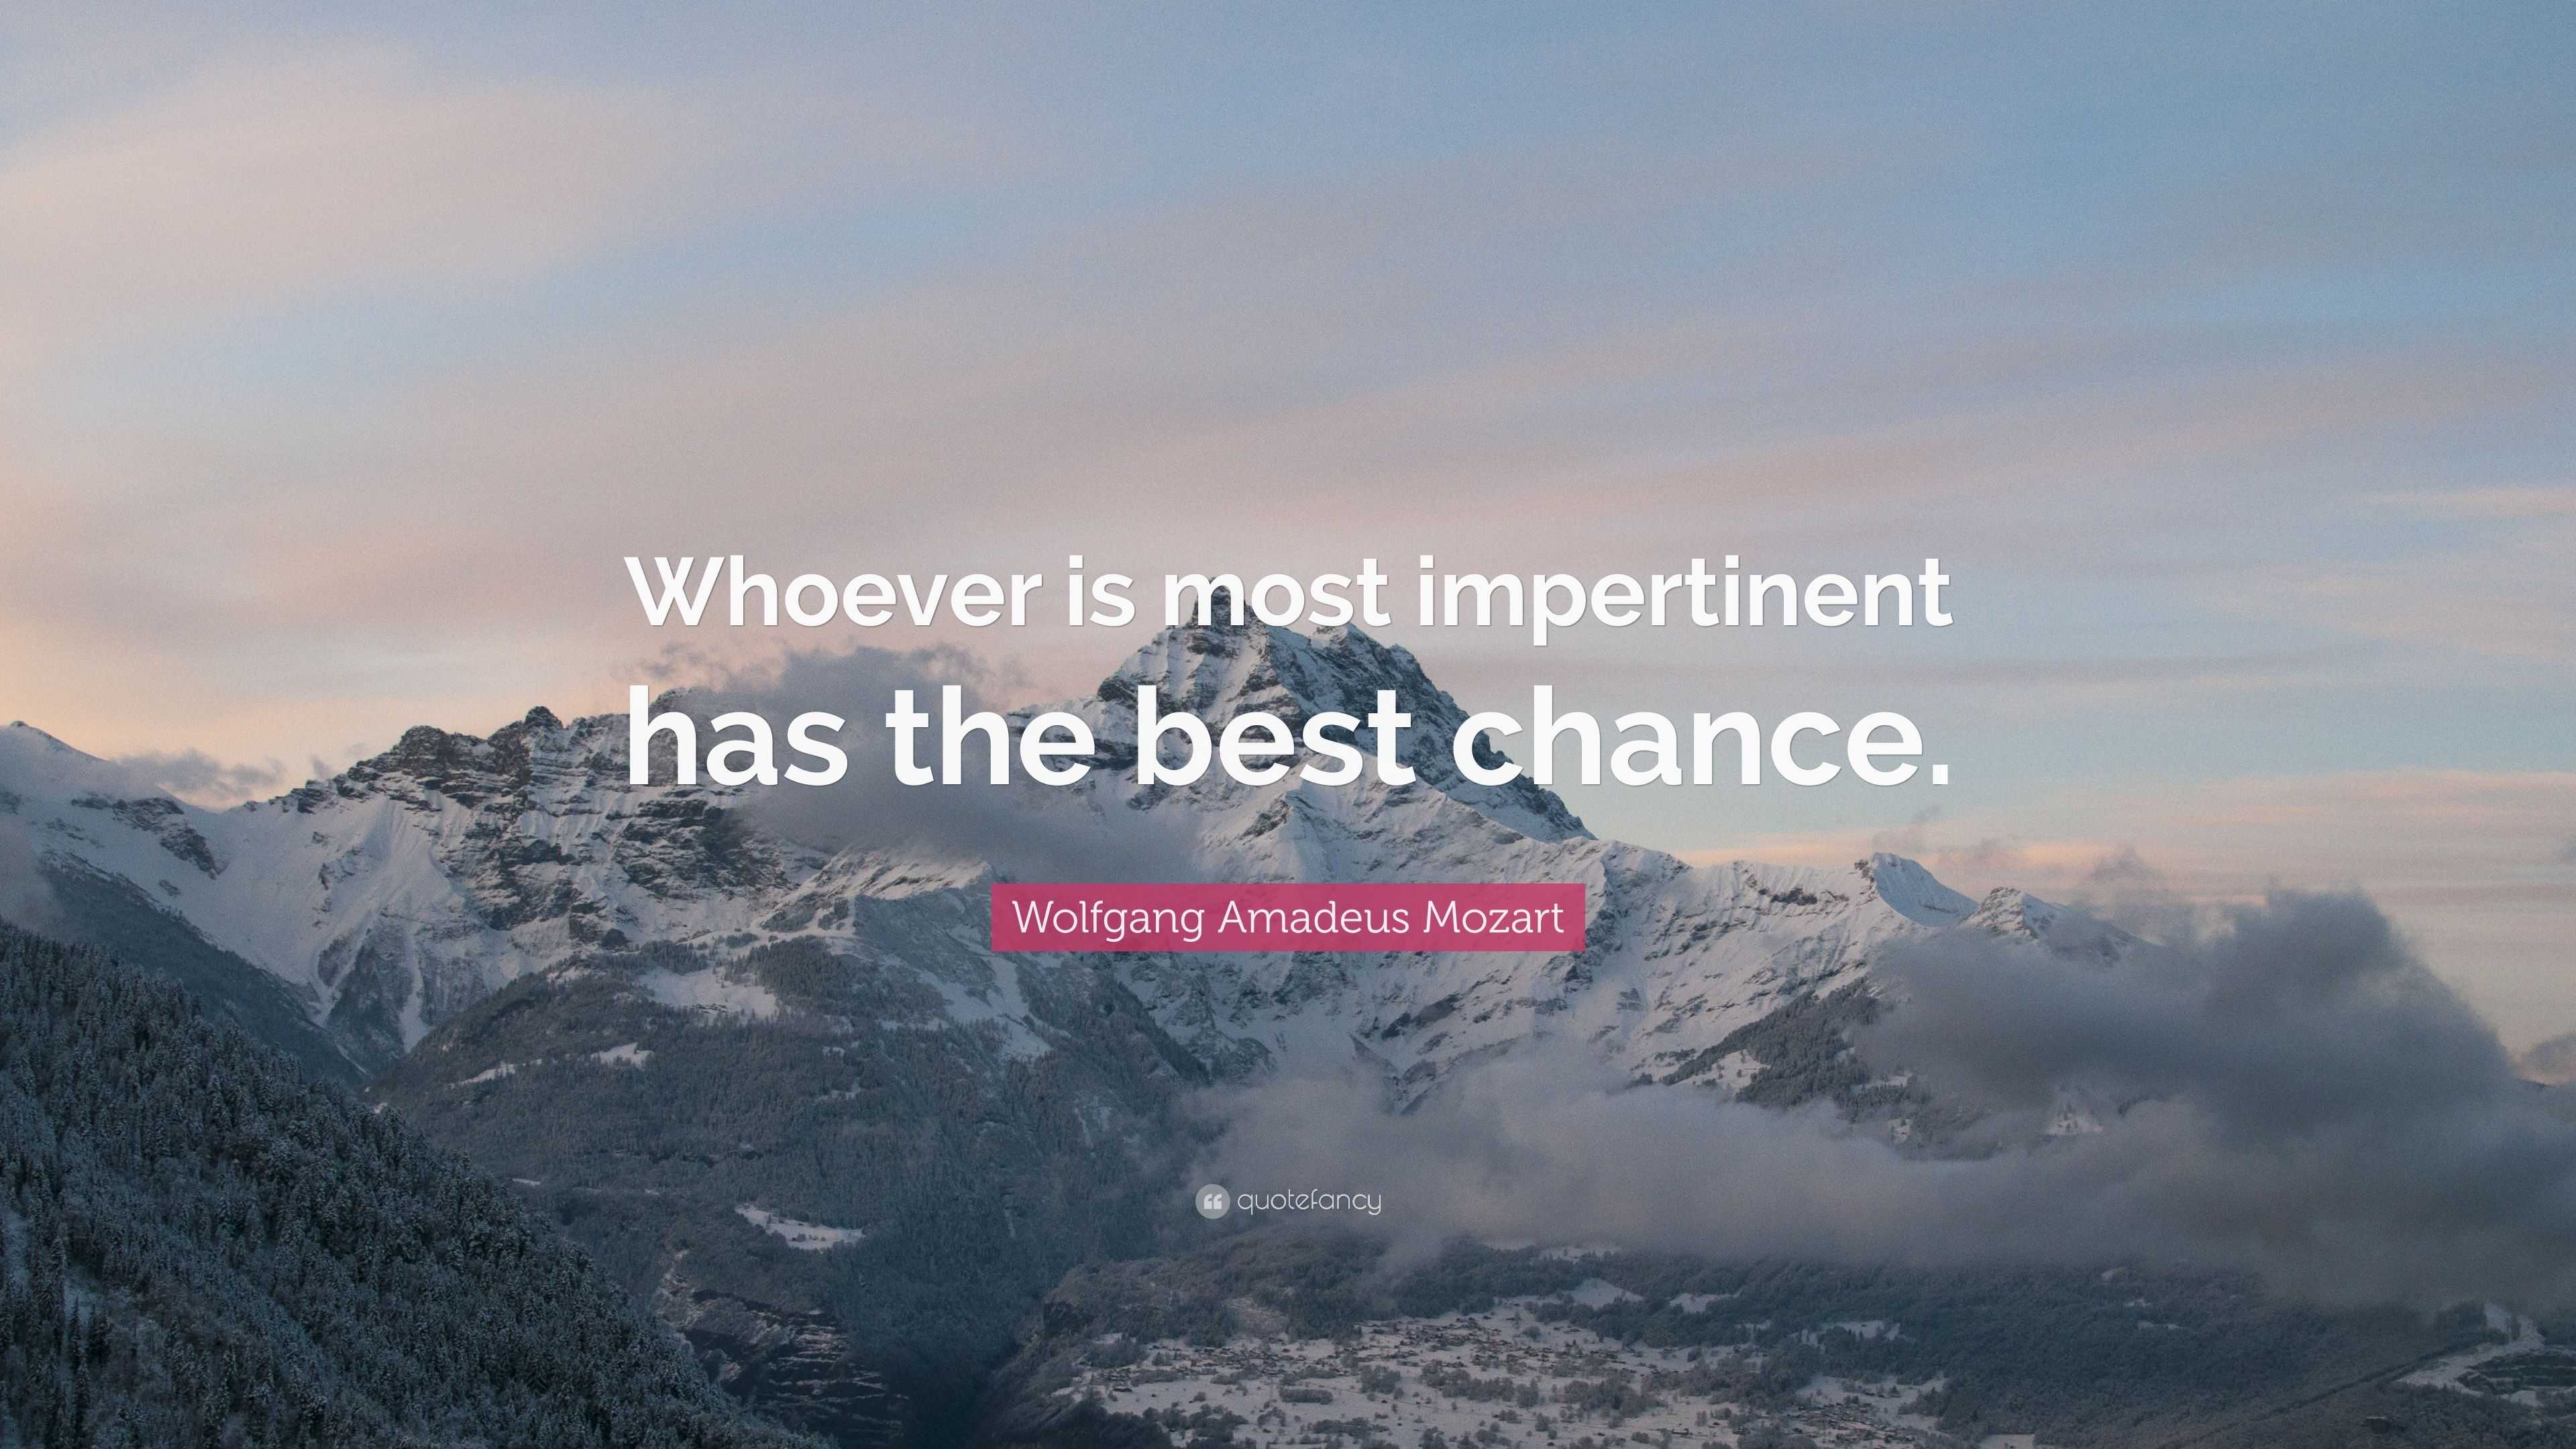 Wolfgang Amadeus Mozart Quote: “Whoever is most impertinent has the ...